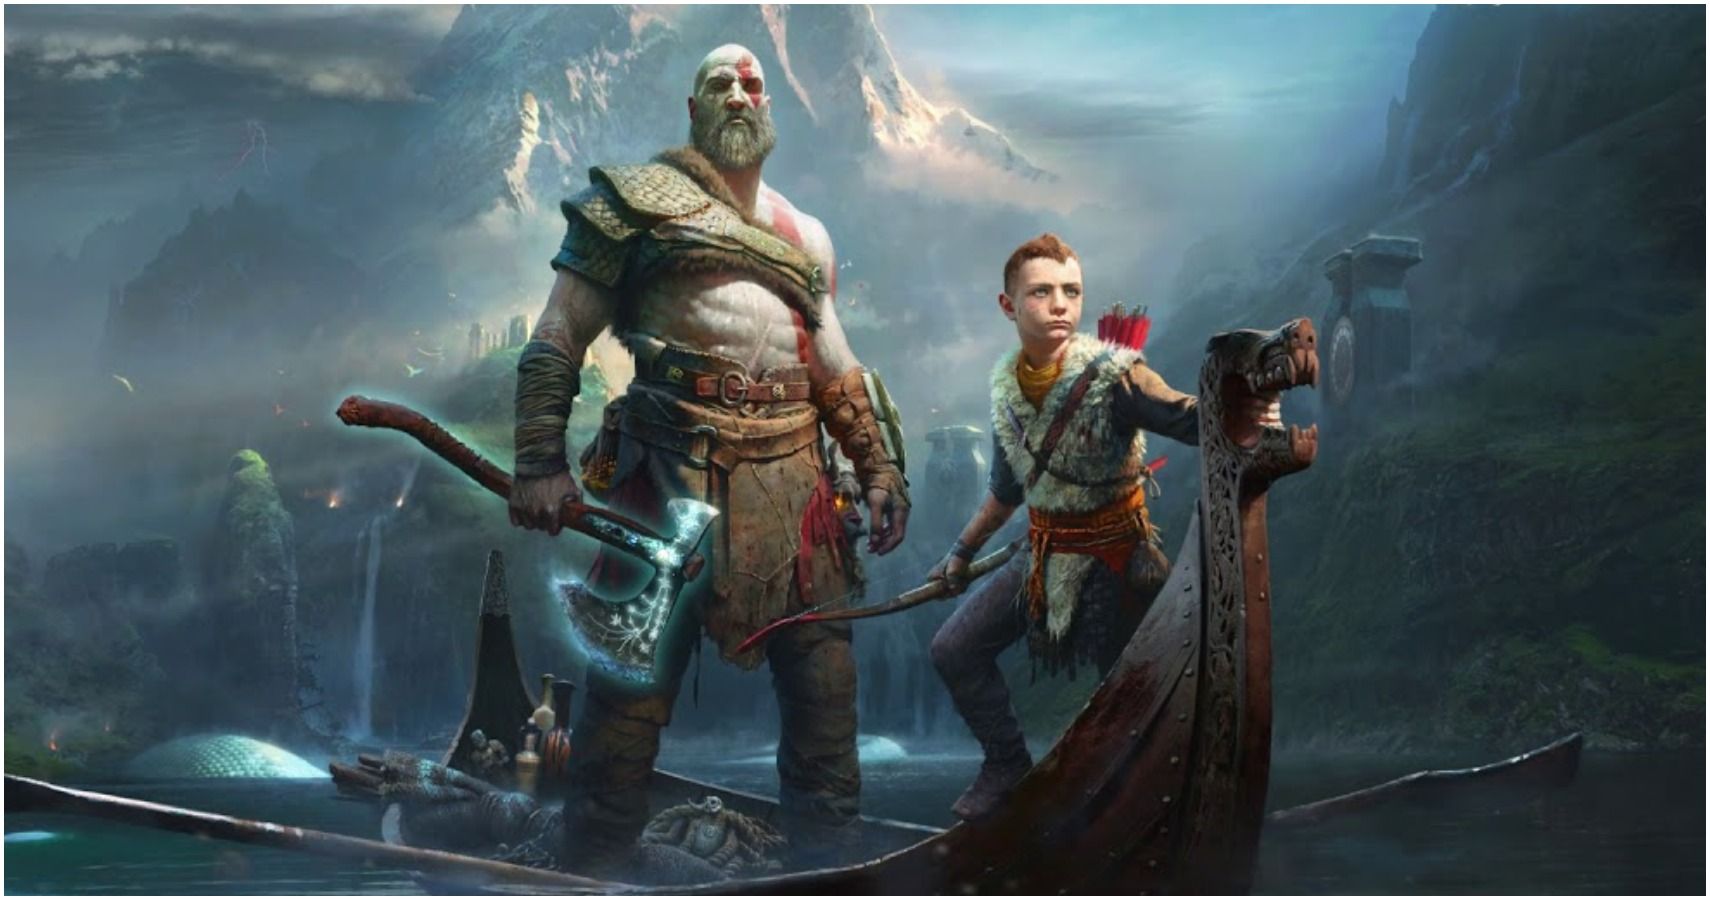 10 Epic Movies To Watch If You Love The God Of War Games